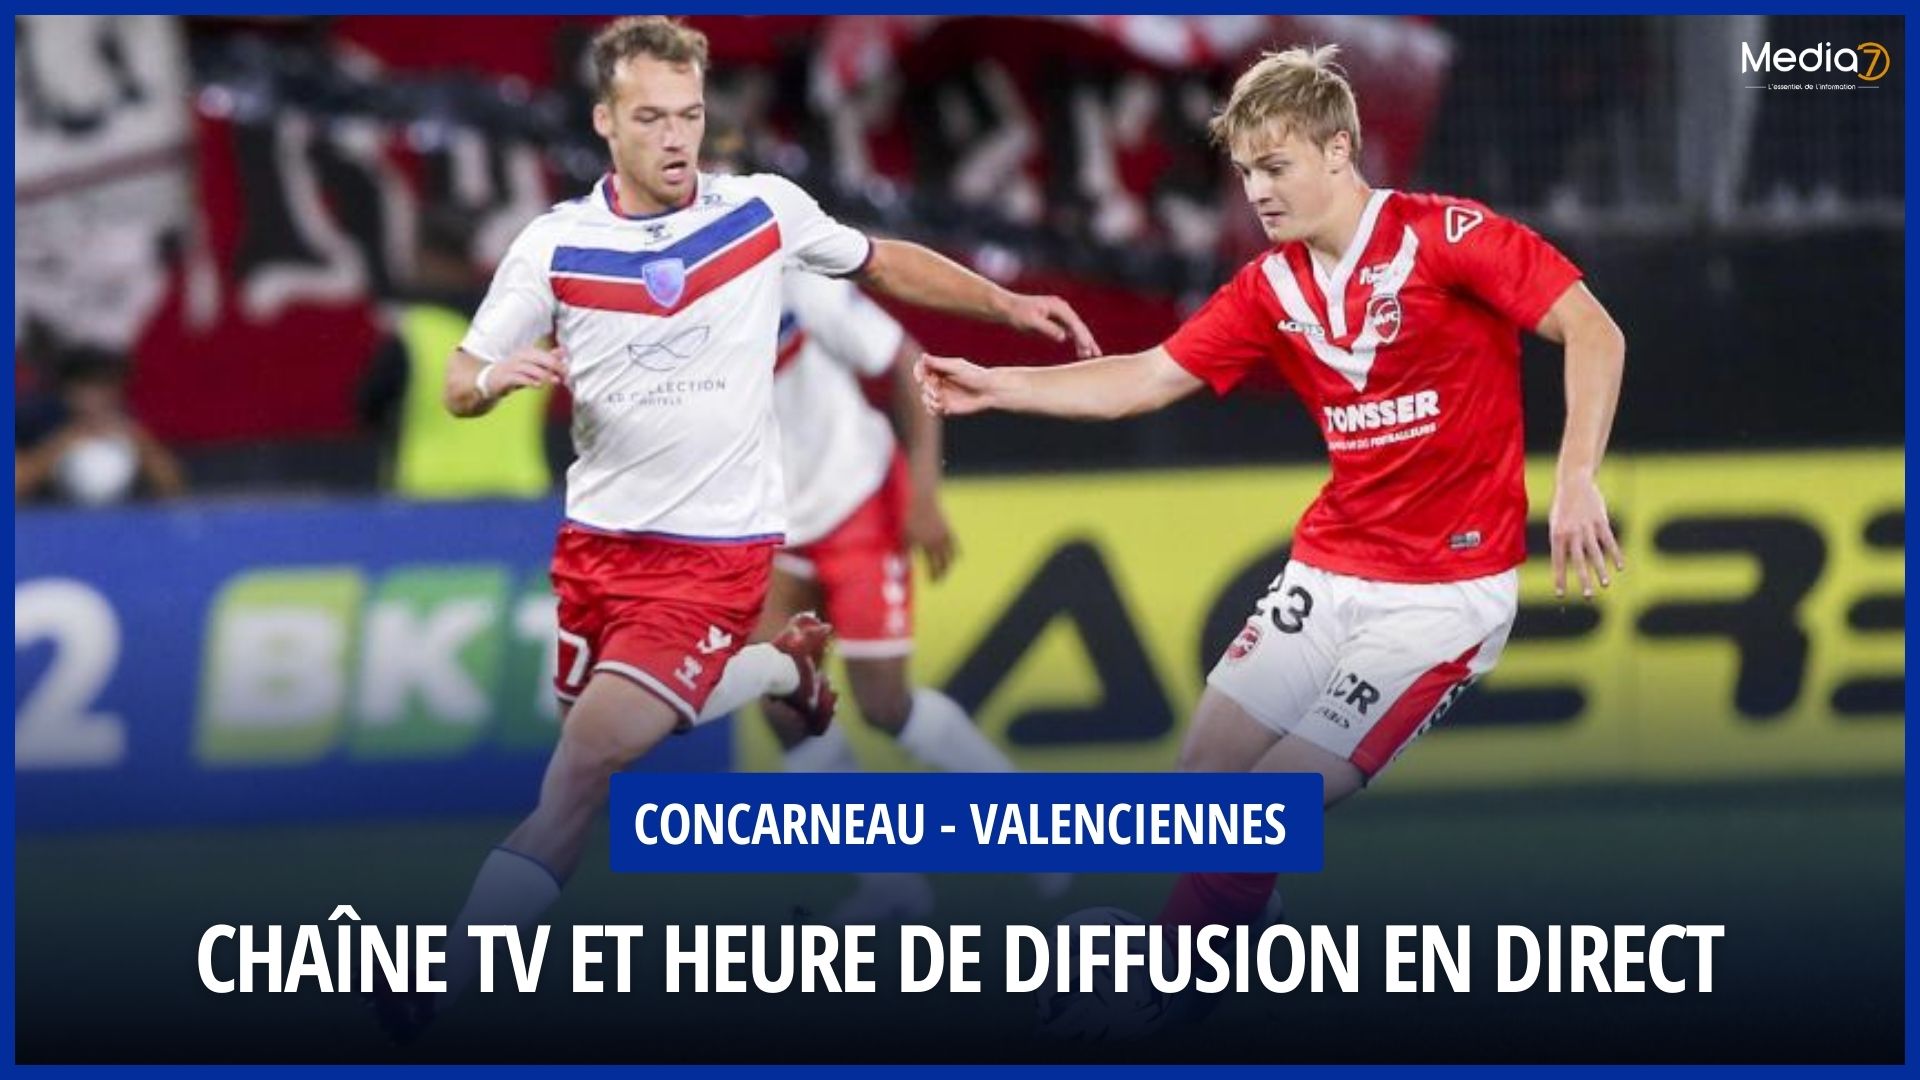 Concarneau - Valenciennes match live: TV & streaming broadcast, schedule and details not to be missed - Media7